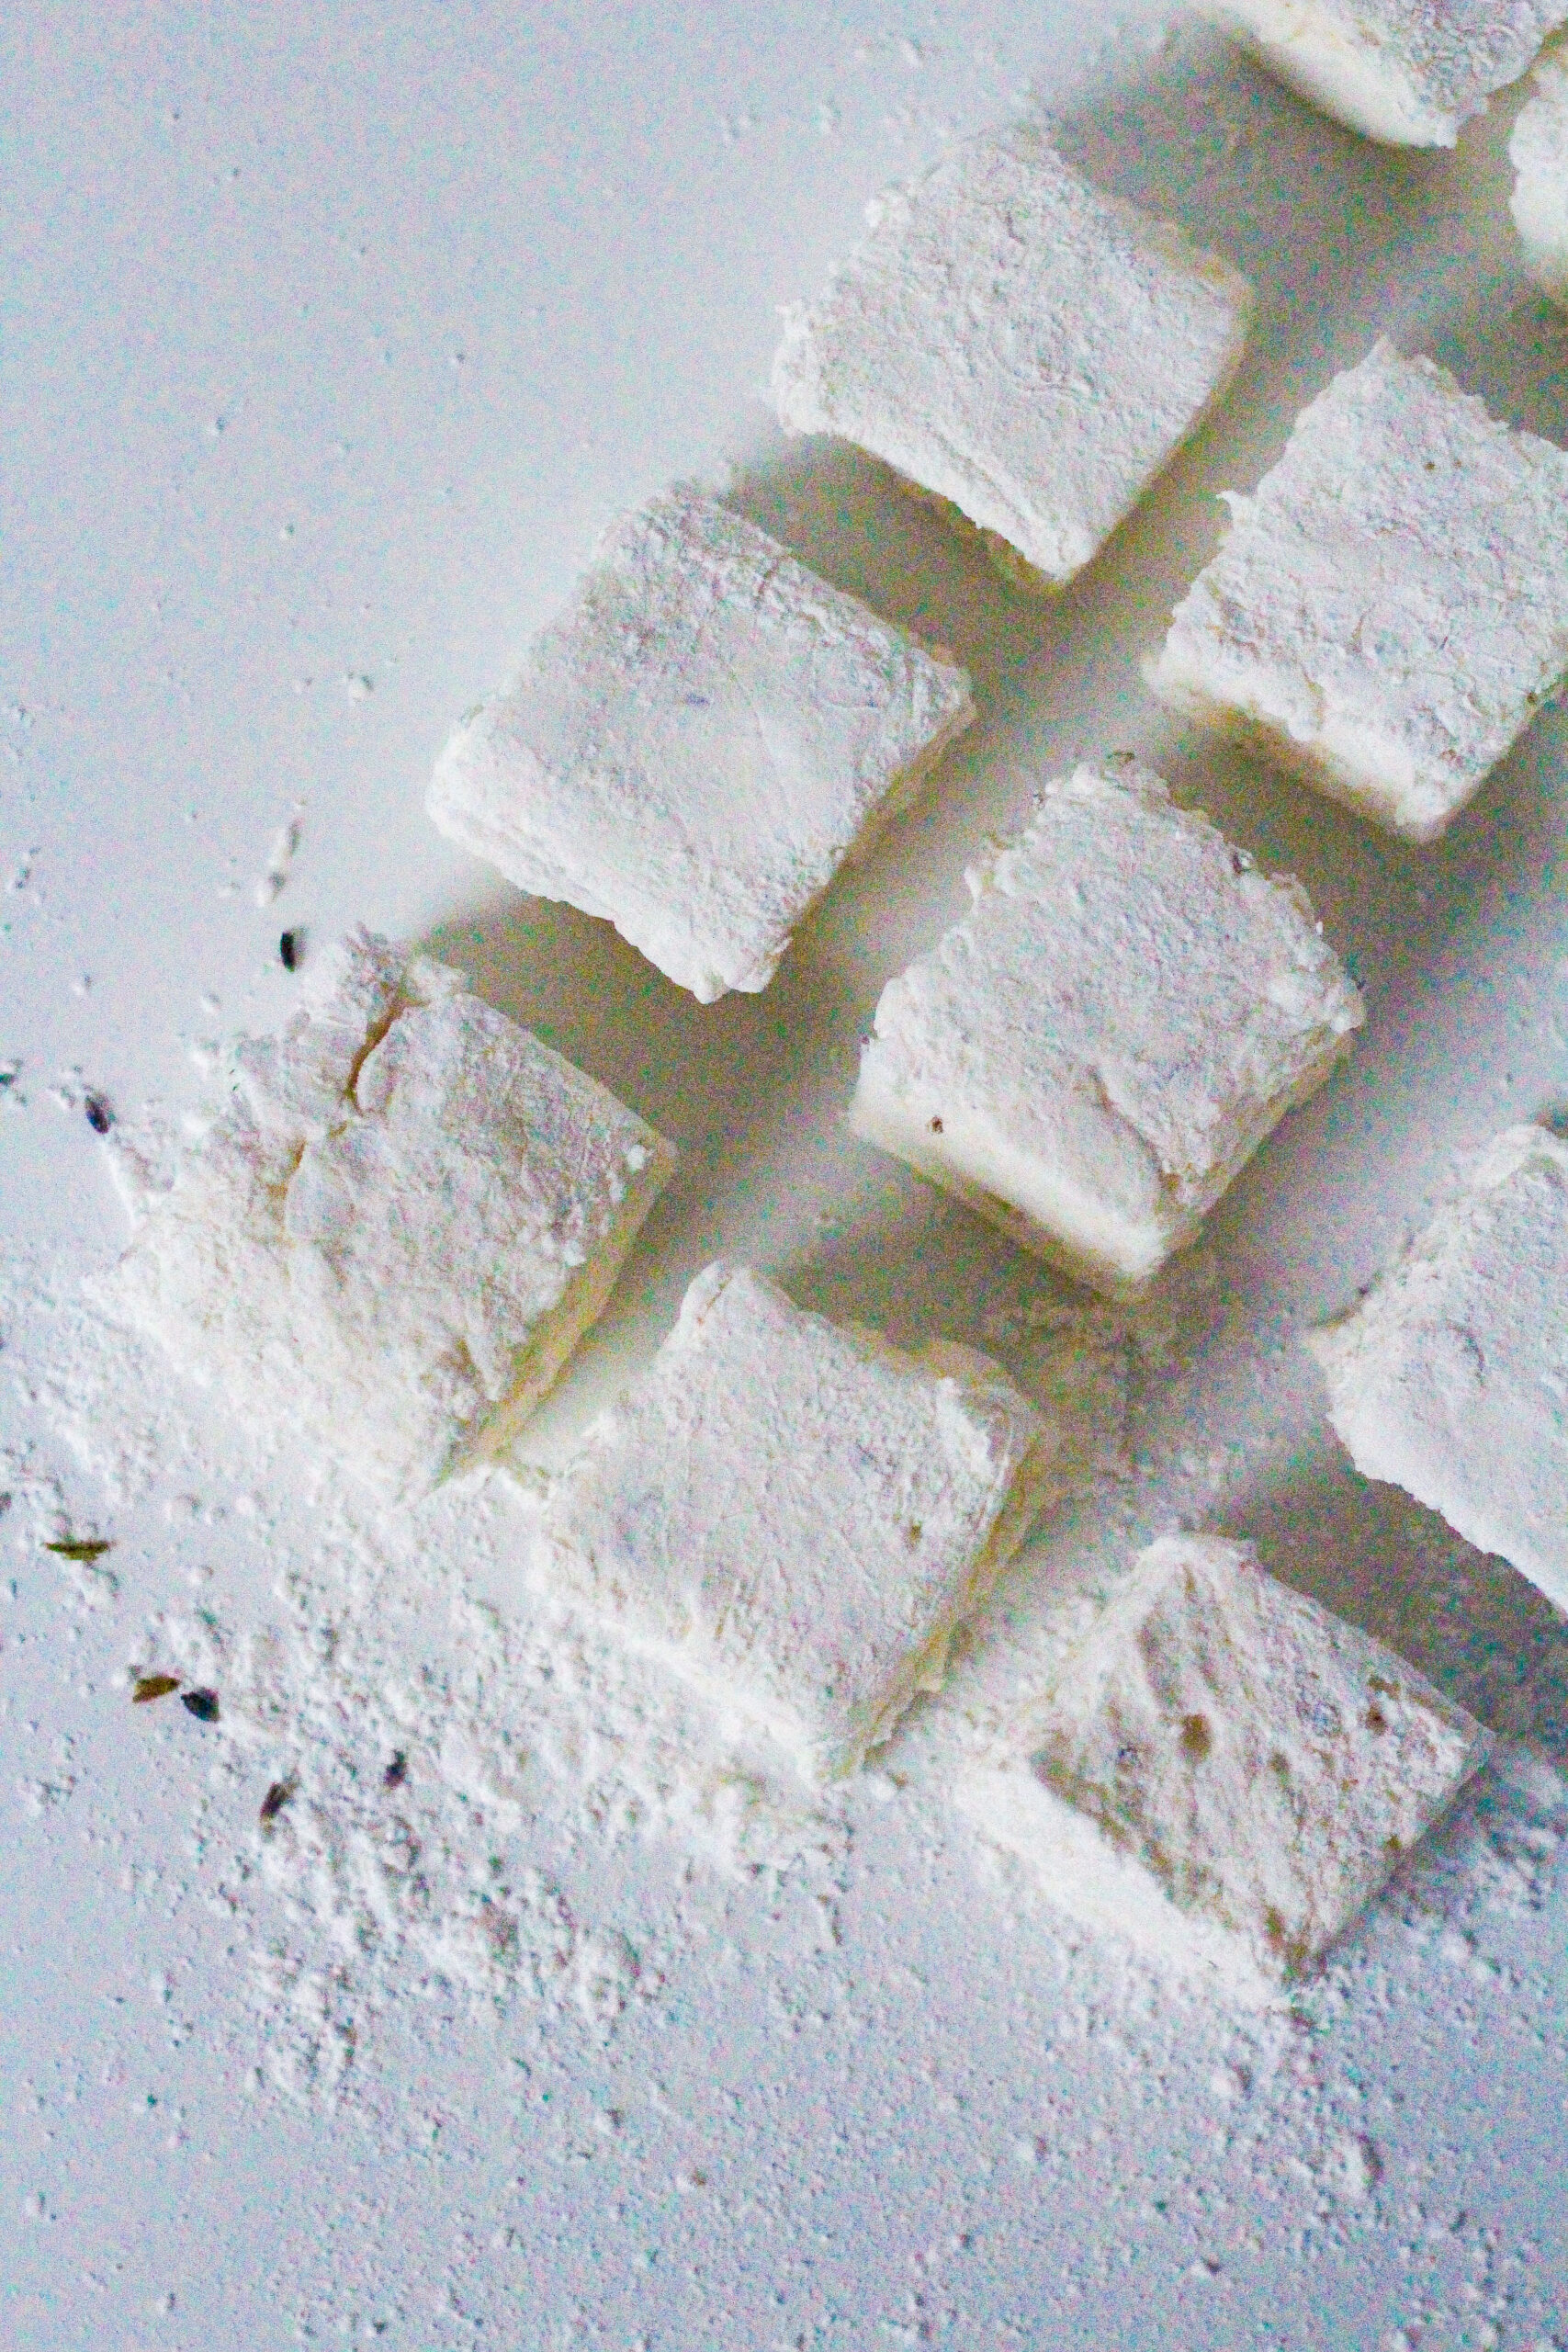 top down view of lemon lavender marshmallows arranged in a rectangular pattern with a bit of space between each marshmallow. The rectangle of marshmallows is coming into the frame from the top right corner at an angle so that going from the midleft side of the frame up to the top right side of the frame you can see three and a piece of a fourth marshmallows forming the left side of the rectangle. From that same center left marshmallow going down to the bottom right of the frame there are two more marshmallows forming the shorter bottom side of the rectangle. The center left marshmallow is surrounded by powdered sugar, corn starch, and lavender.